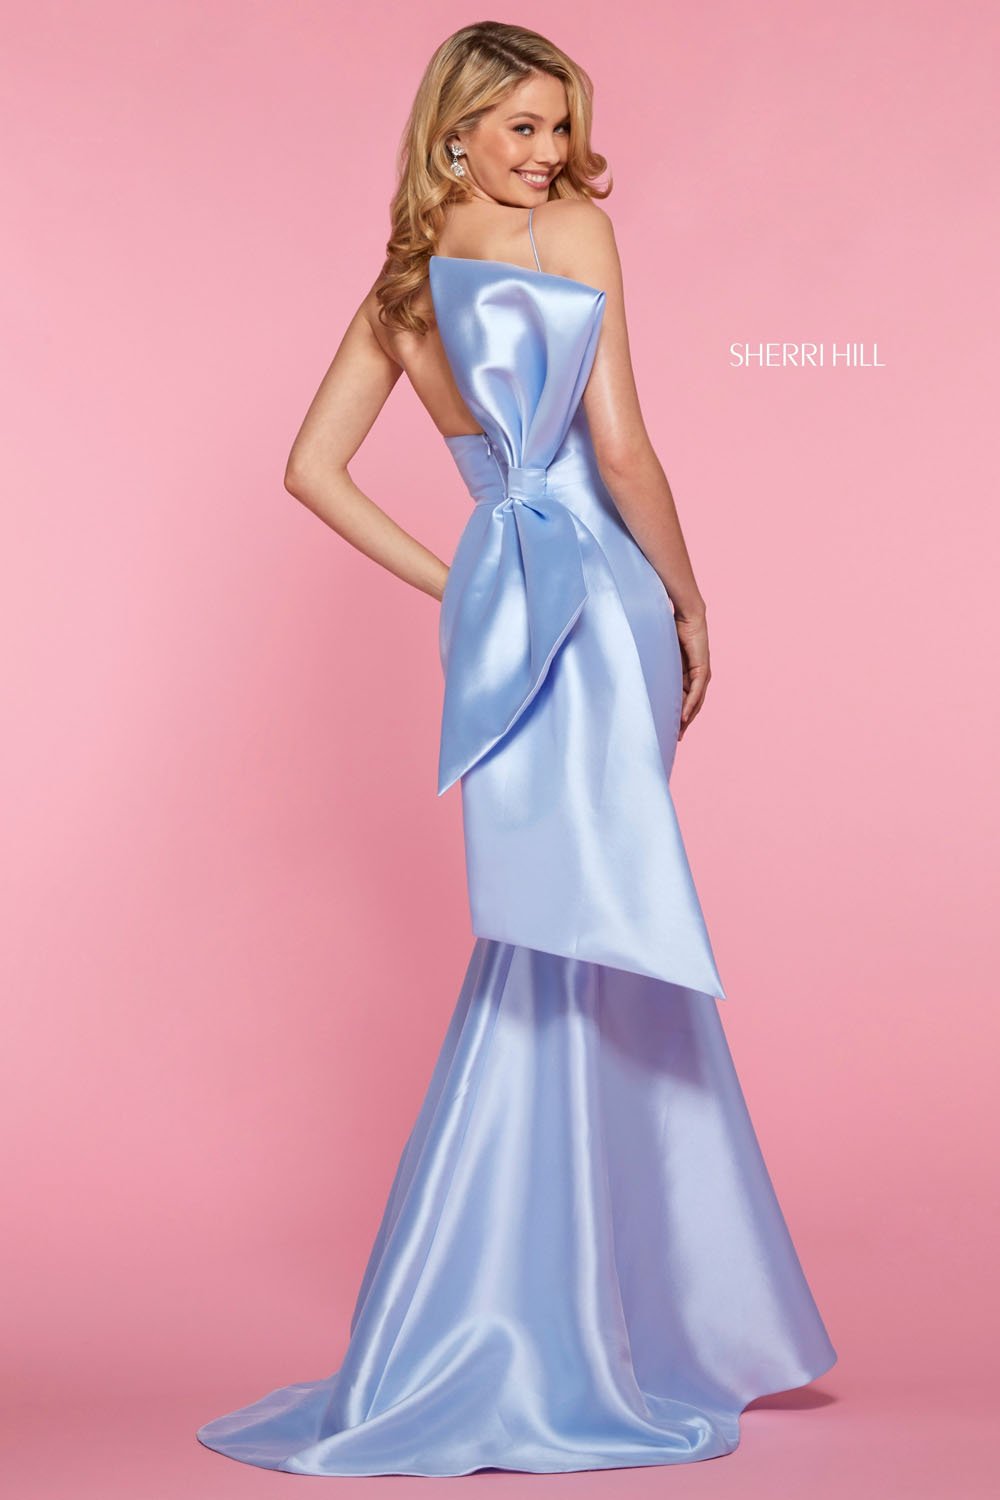 Sherri Hill 53336 dress images in these colors: Ivory, Light Blue, Black, Candy Pink, Red, Yellow.